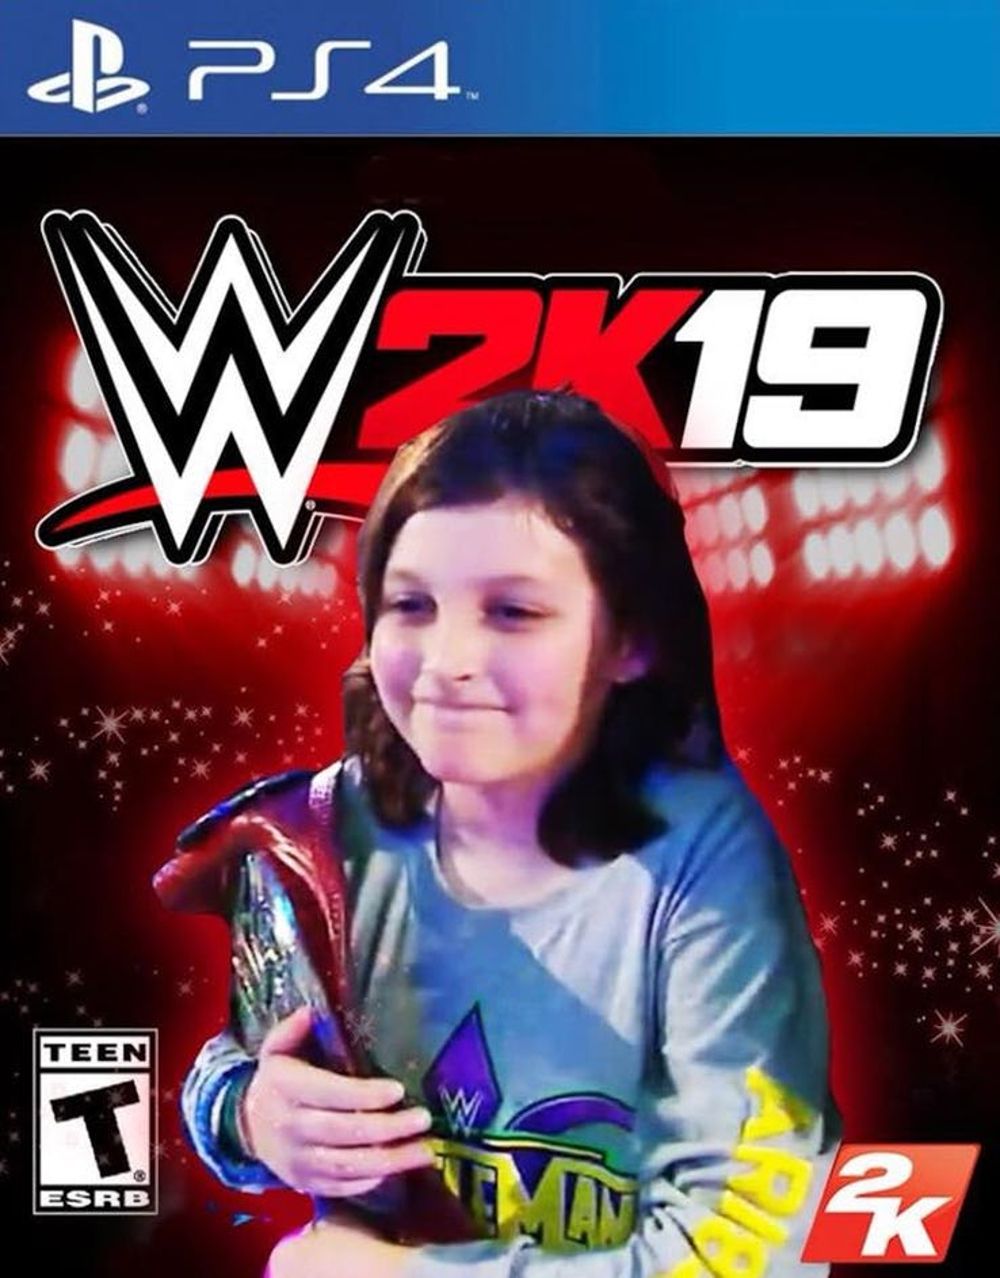 A fake cover for WWE 2K19 featuring 10-year-old Nicholas